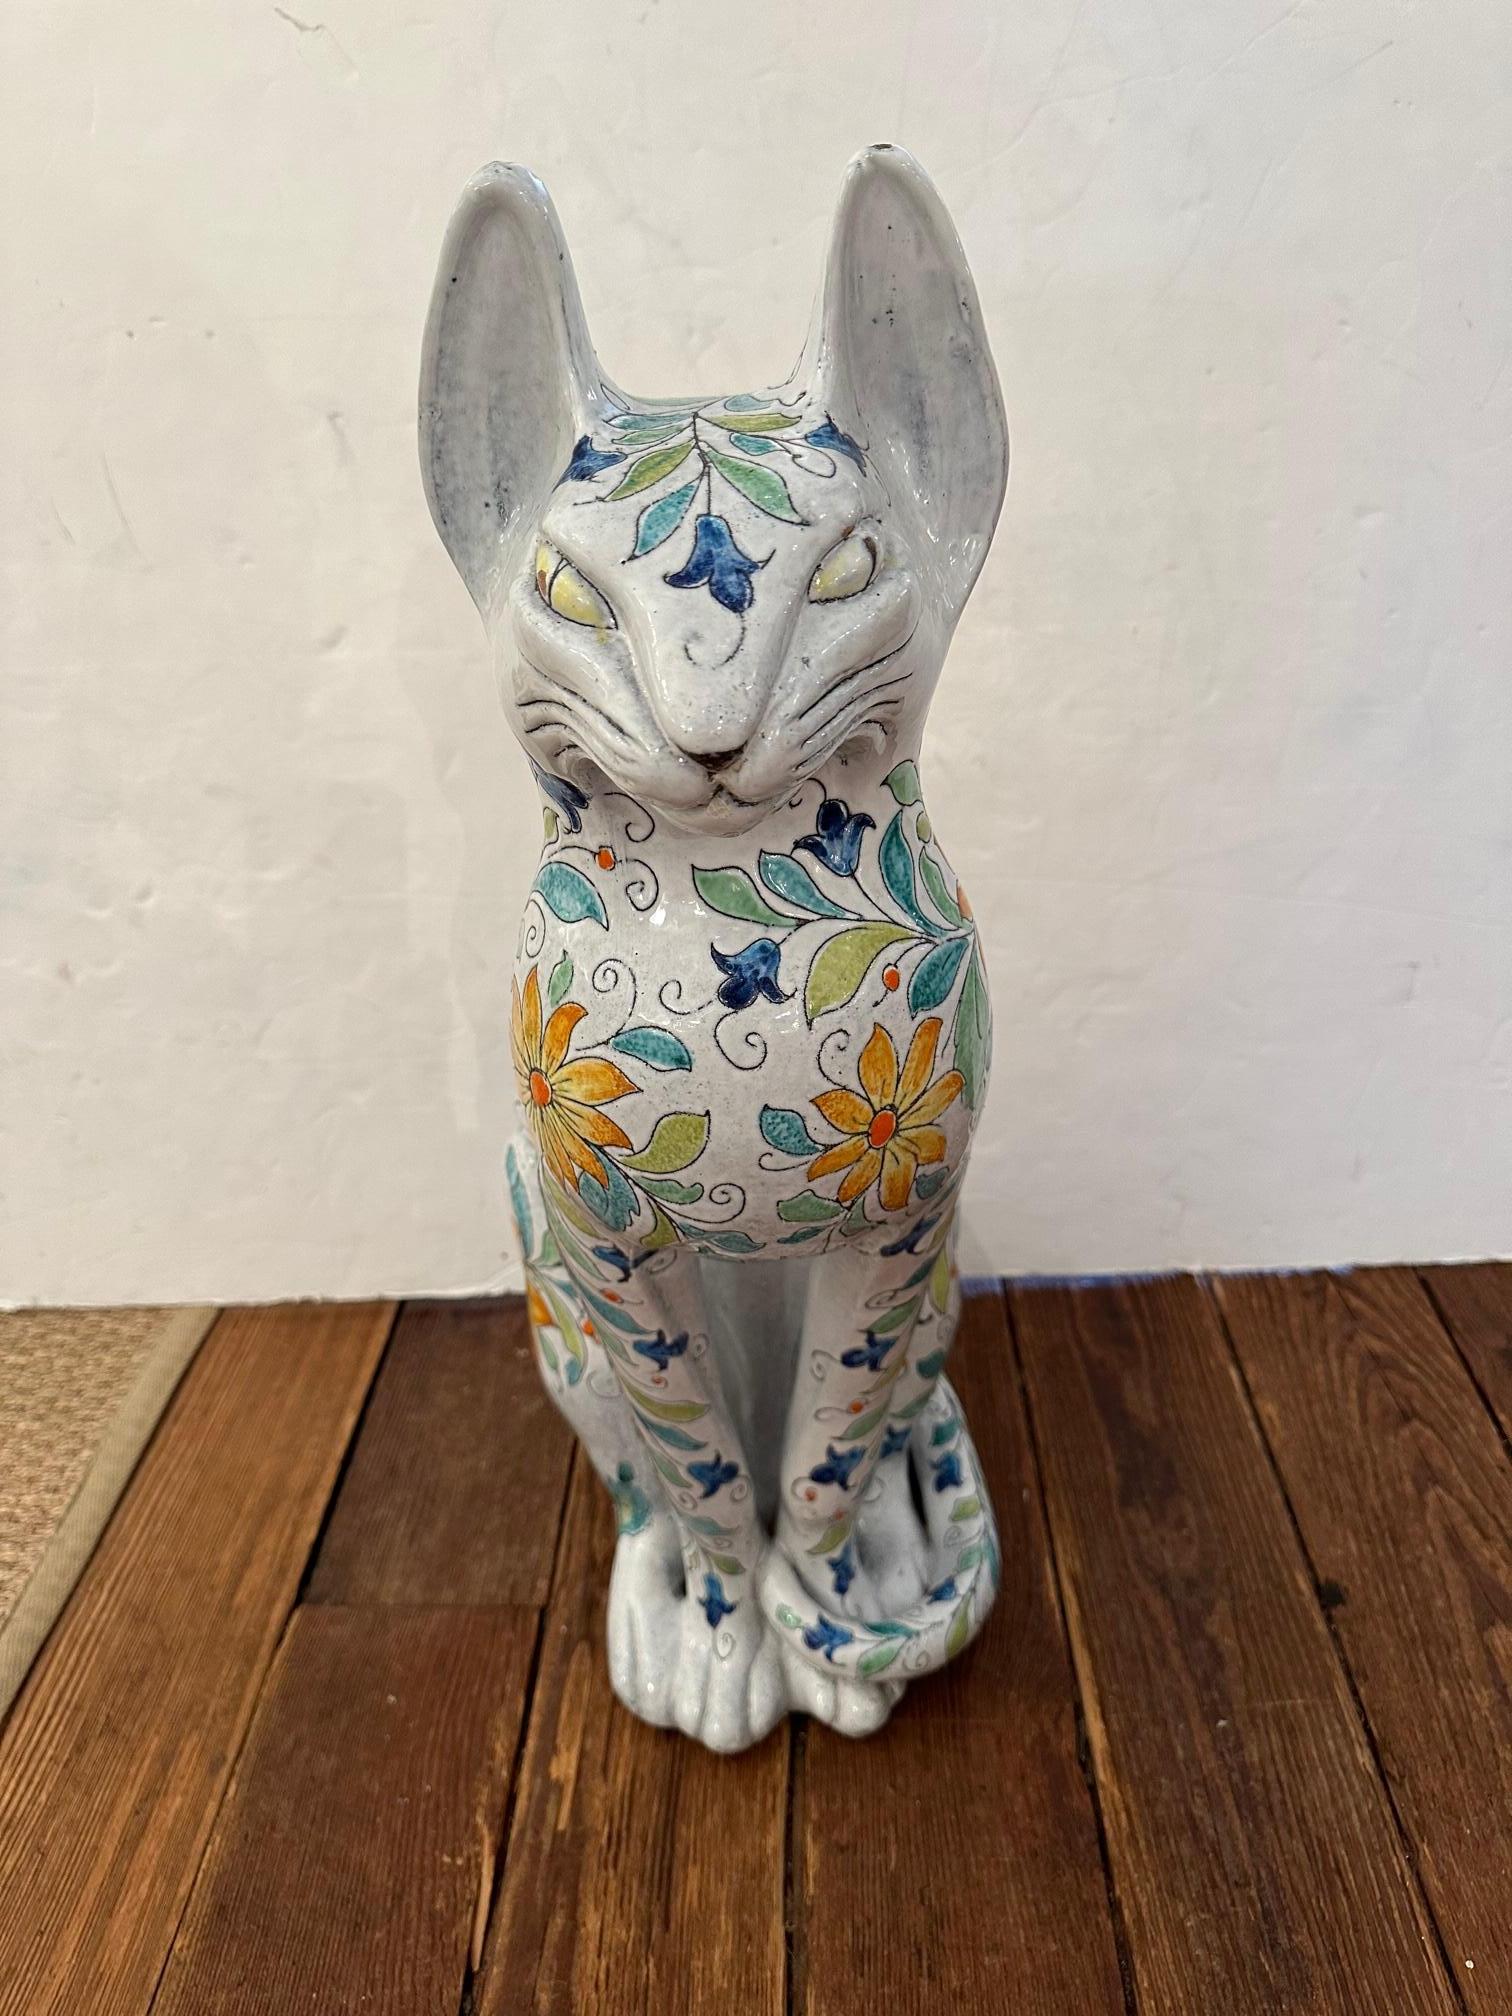 Egyptian Inspired Sgraffito Glazed Terracotta Cat with Floral Decoration For Sale 5